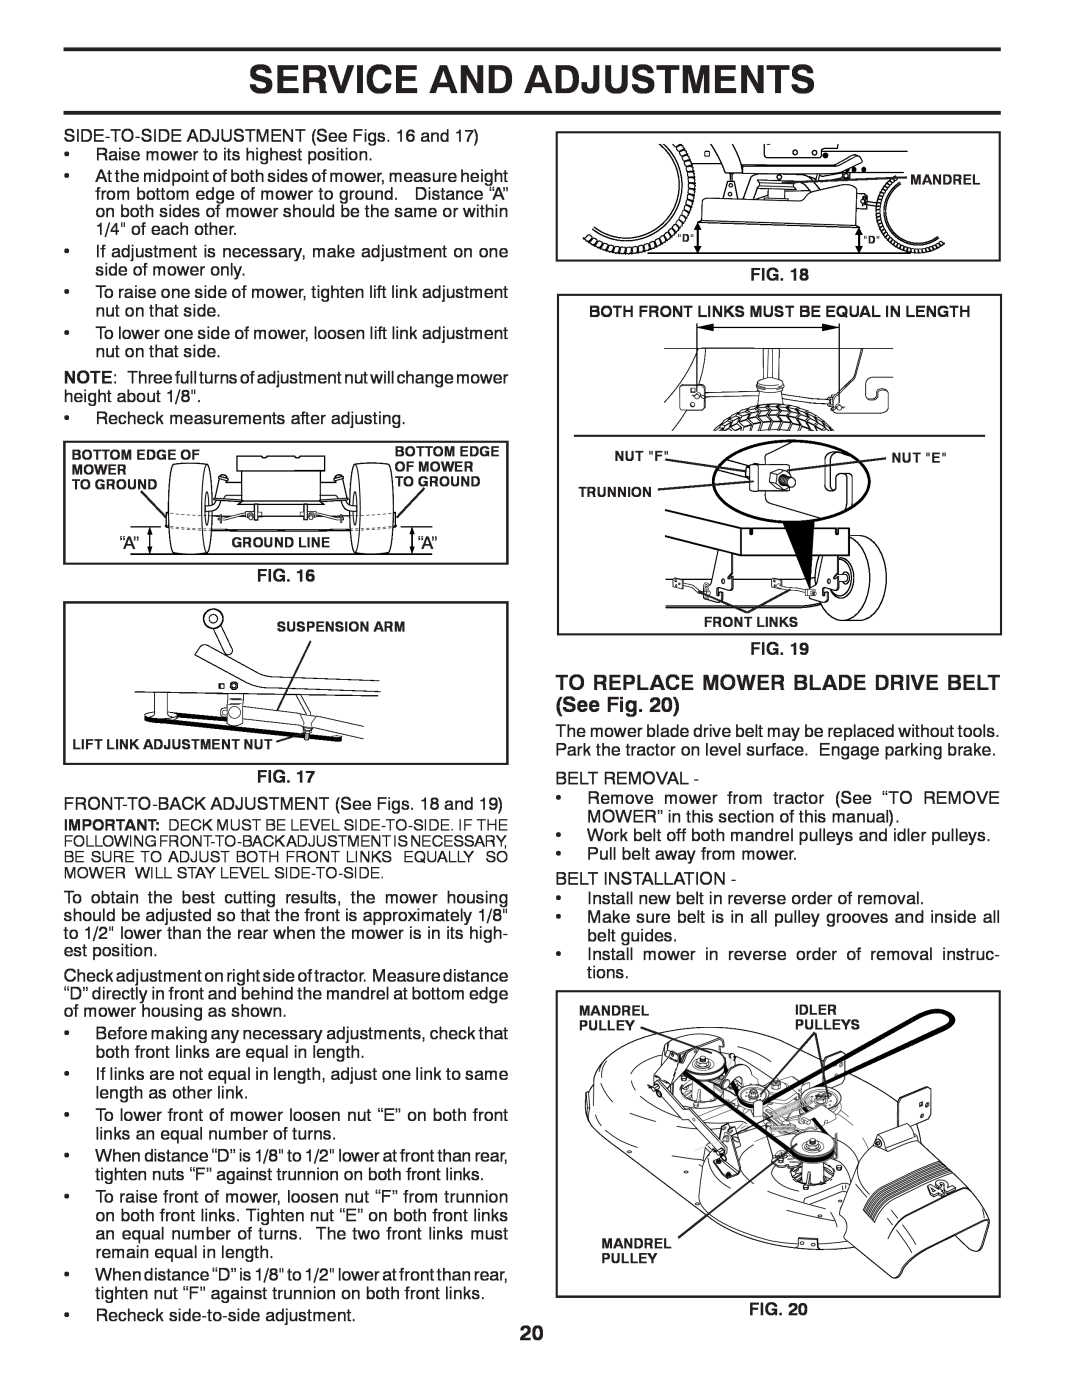 Poulan PBA195H42LT manual TO REPLACE MOWER BLADE DRIVE BELT See Fig, Service And Adjustments 